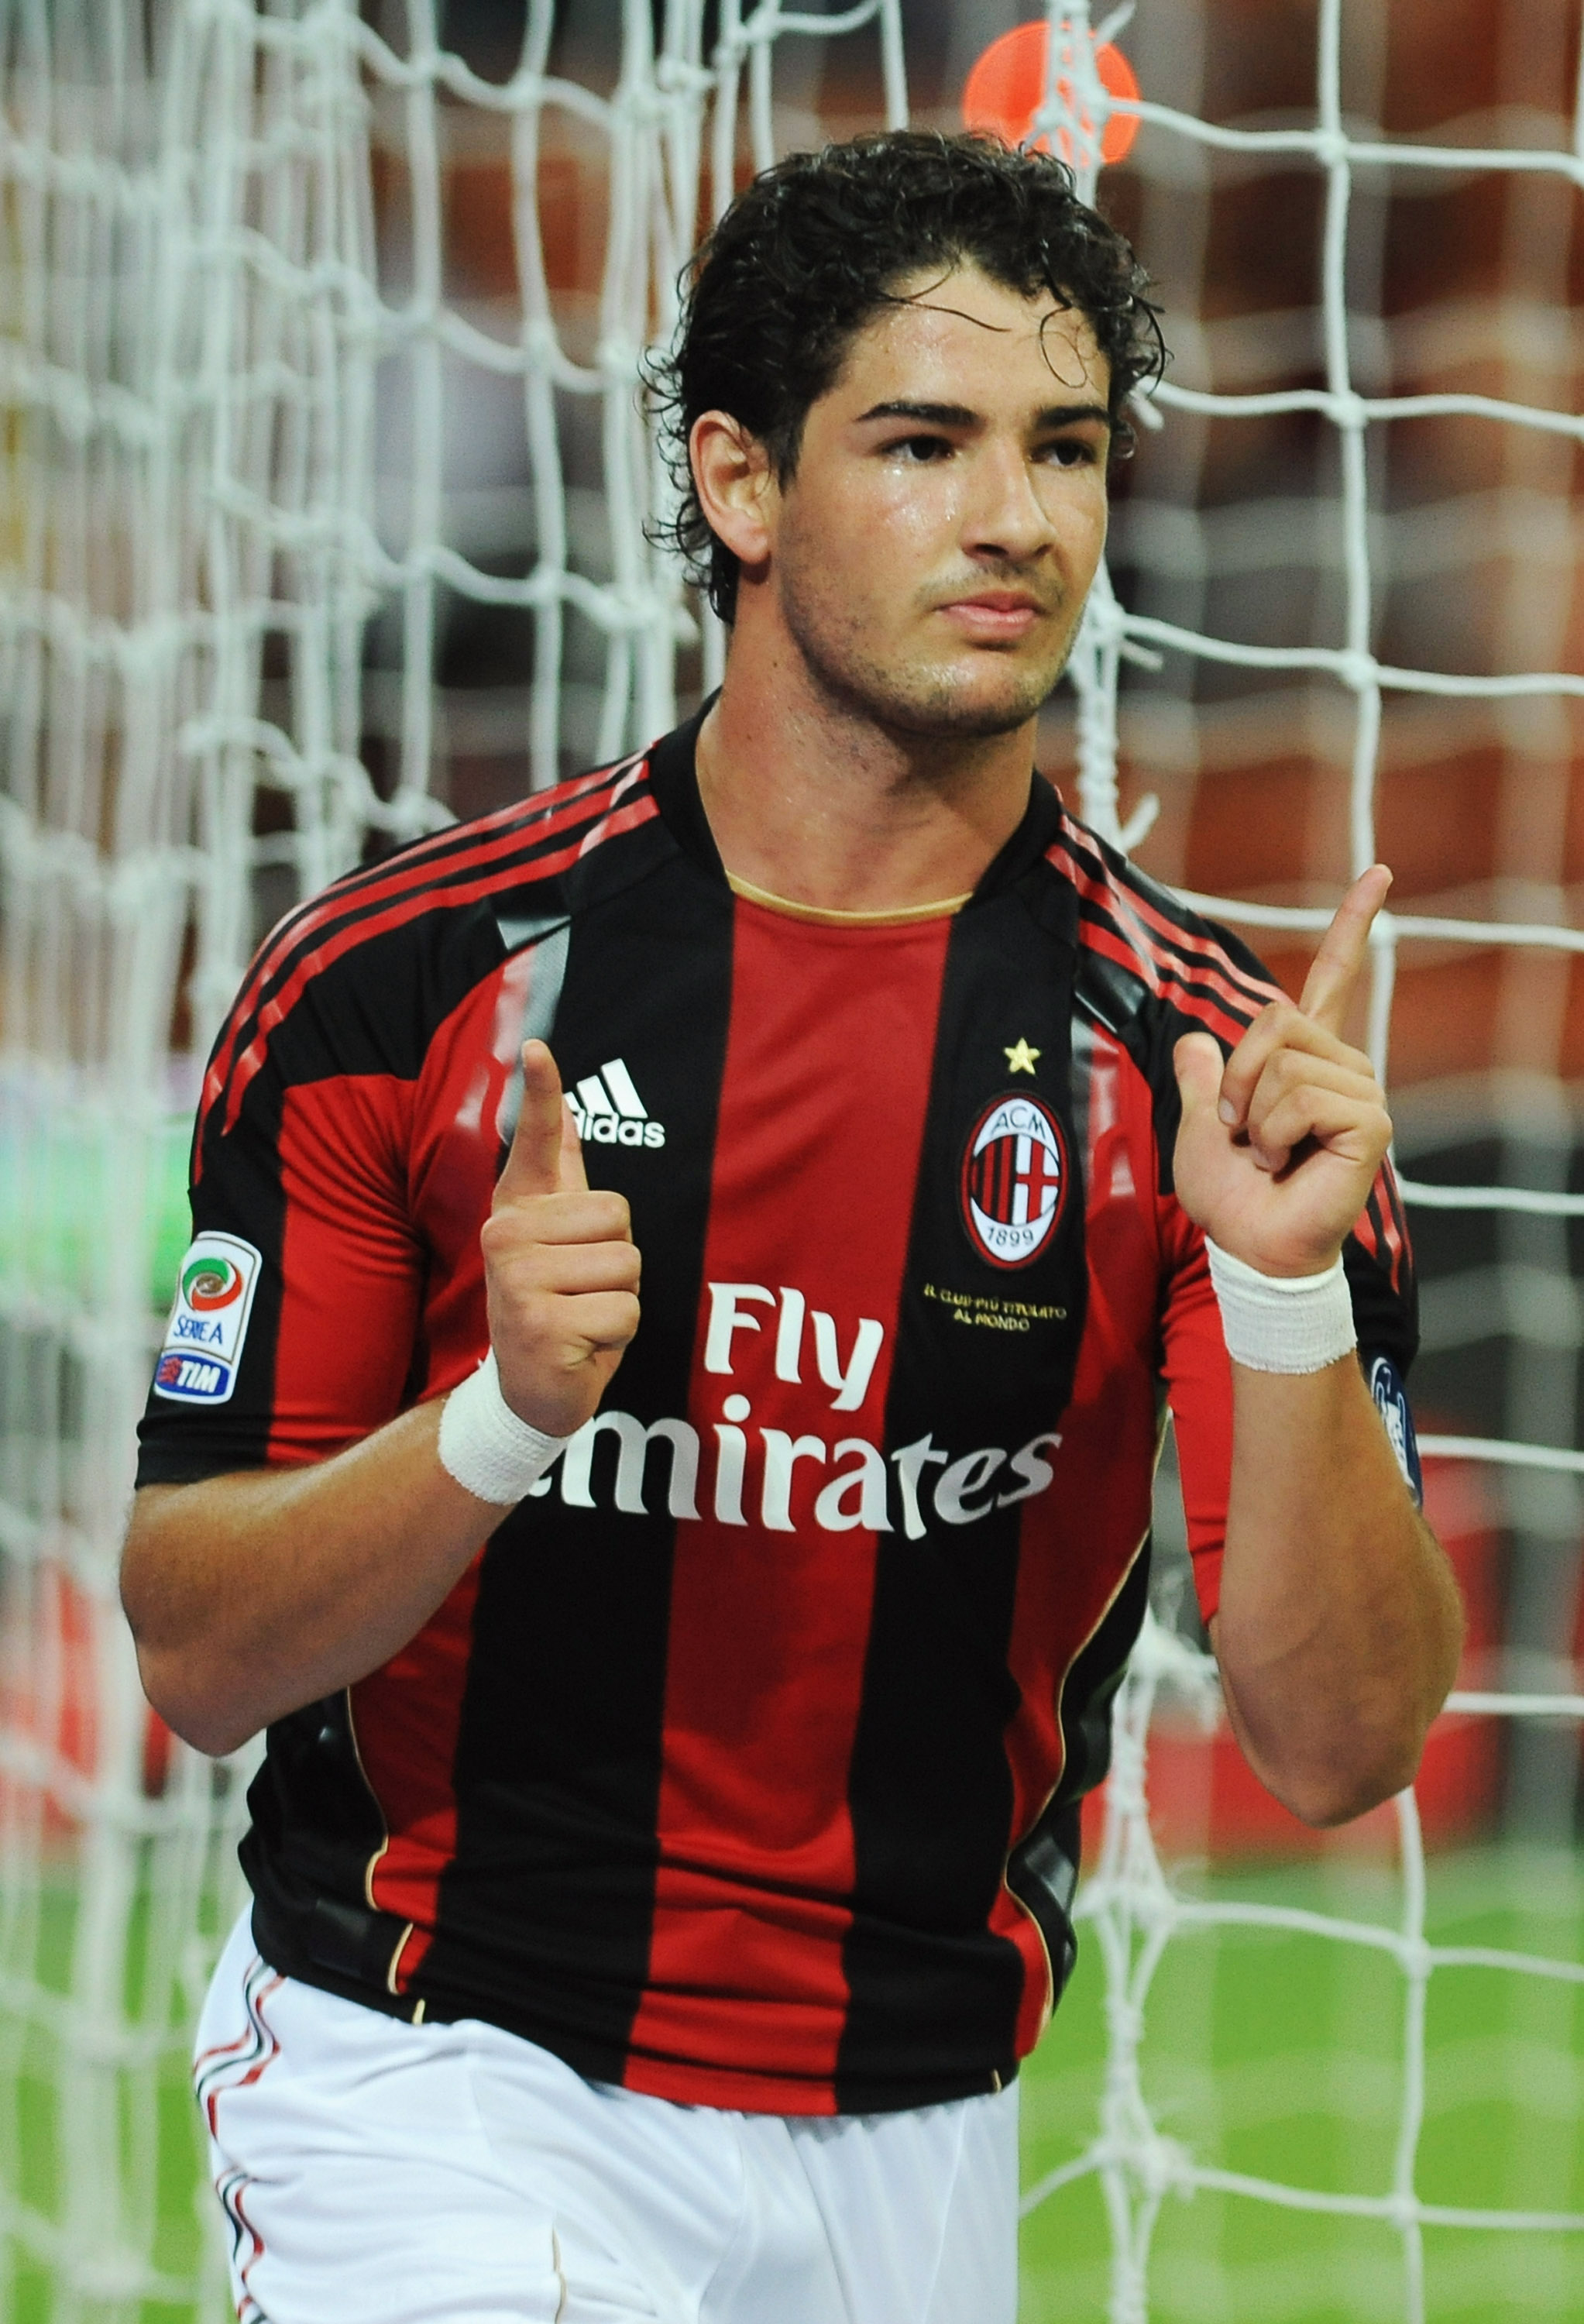 MILAN, ITALY - AUGUST 29:  Pato of AC Milan celebrates the opening goal during the Serie A match between AC Milan and US Lecce at Stadio Giuseppe Meazza on August 29, 2010 in Milan, Italy.  (Photo by Valerio Pennicino/Getty Images)